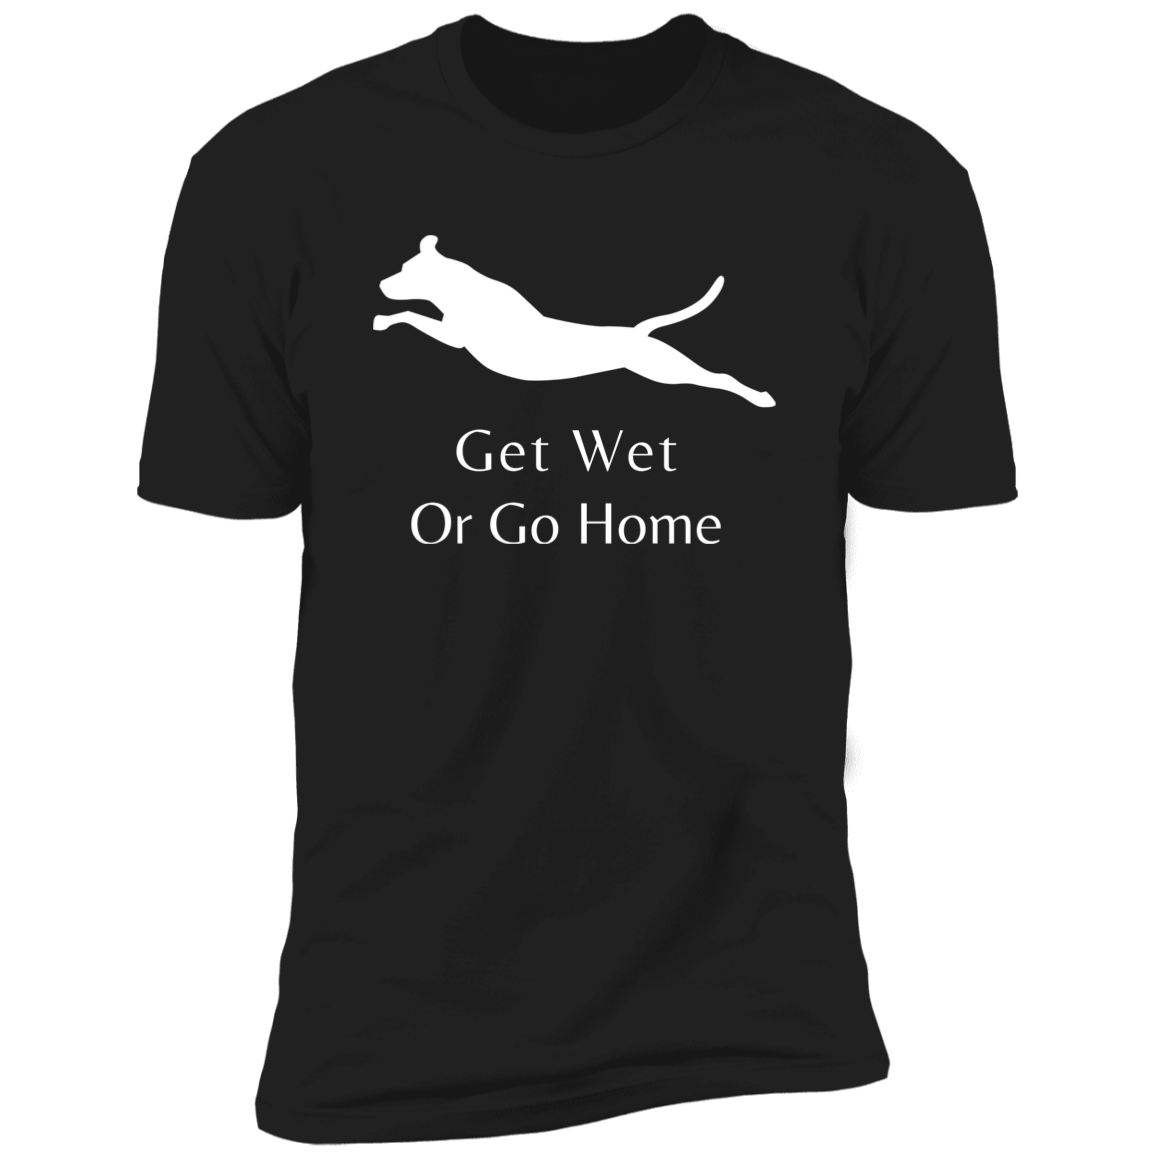 Get Wet or Go Home